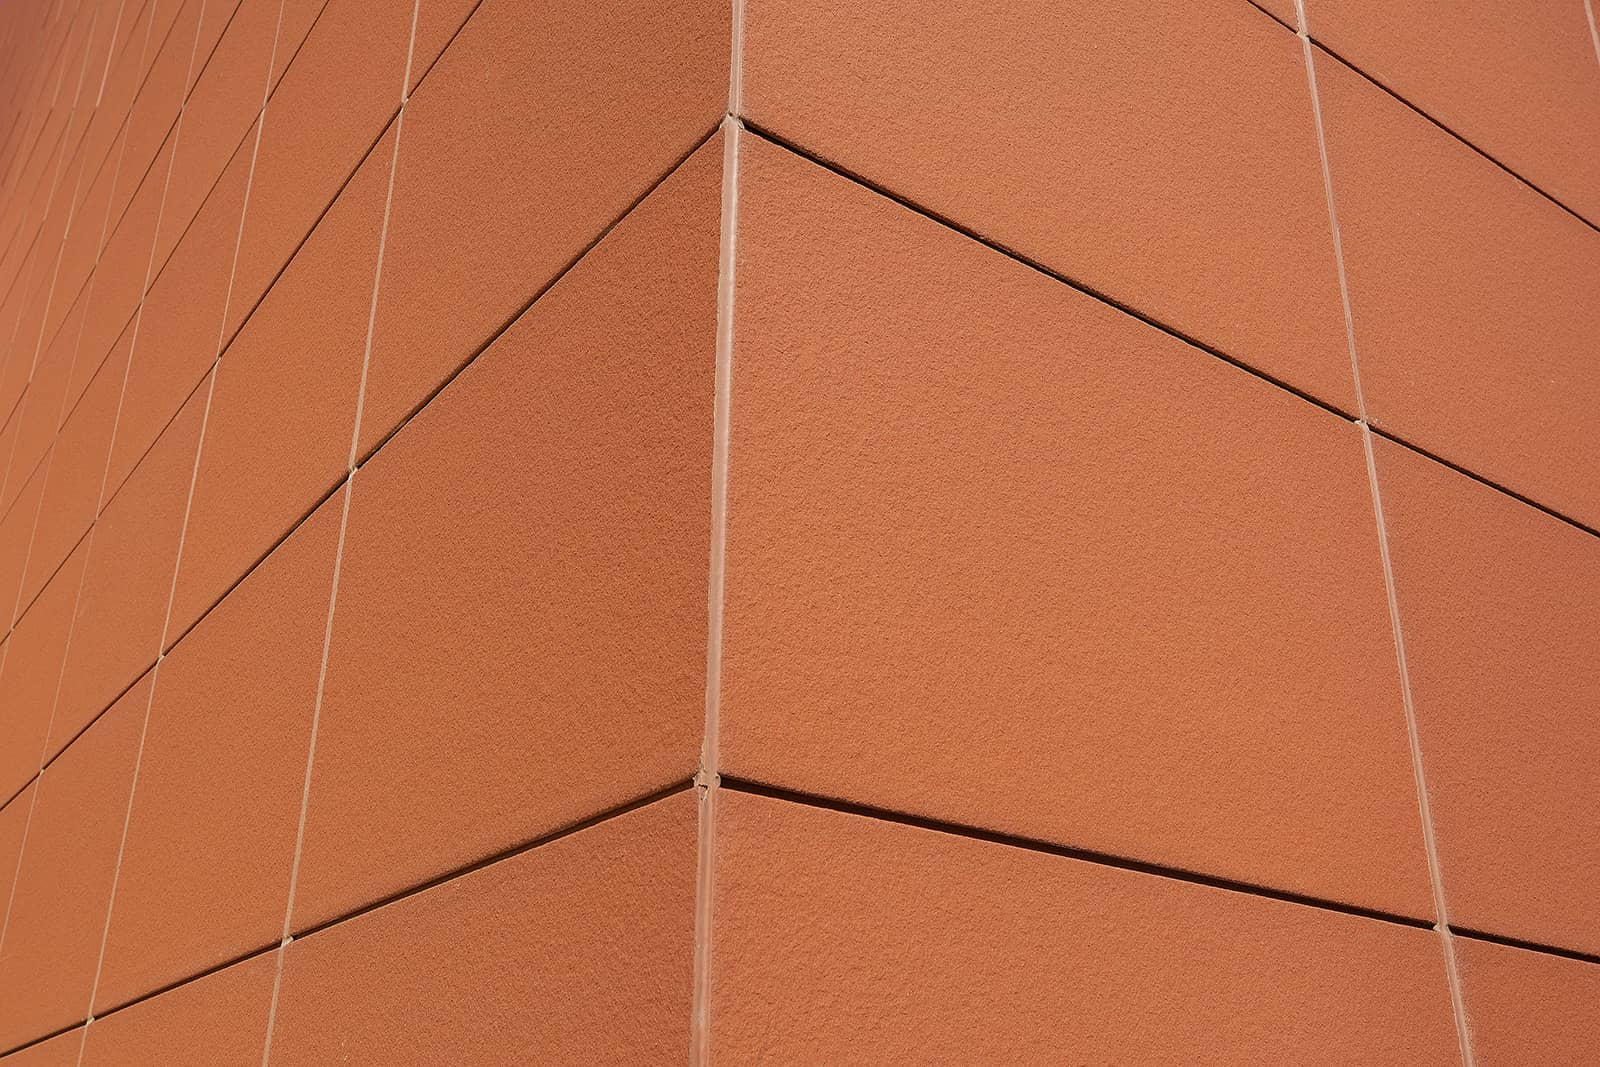 Terracotta Wall in the Exhibition Hall